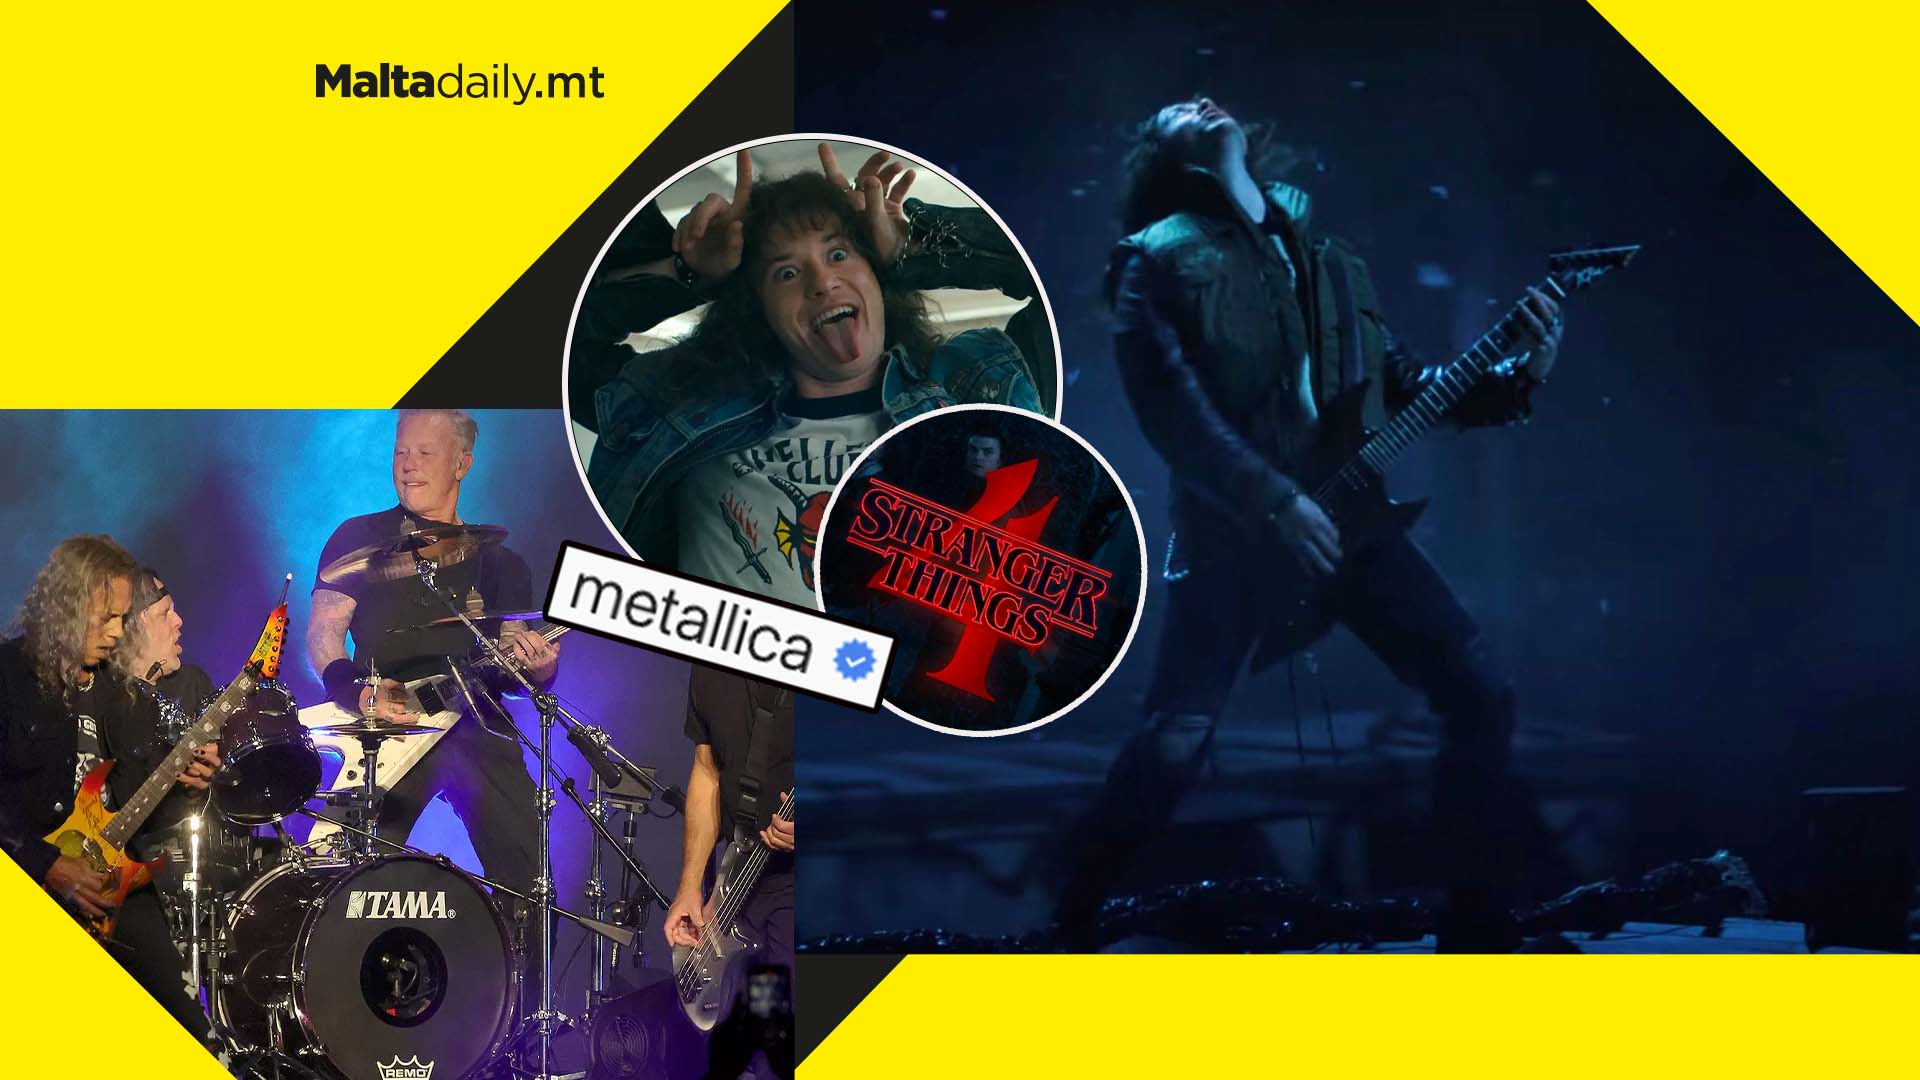 Stranger Things boosts Metallica’s streams up by 400%